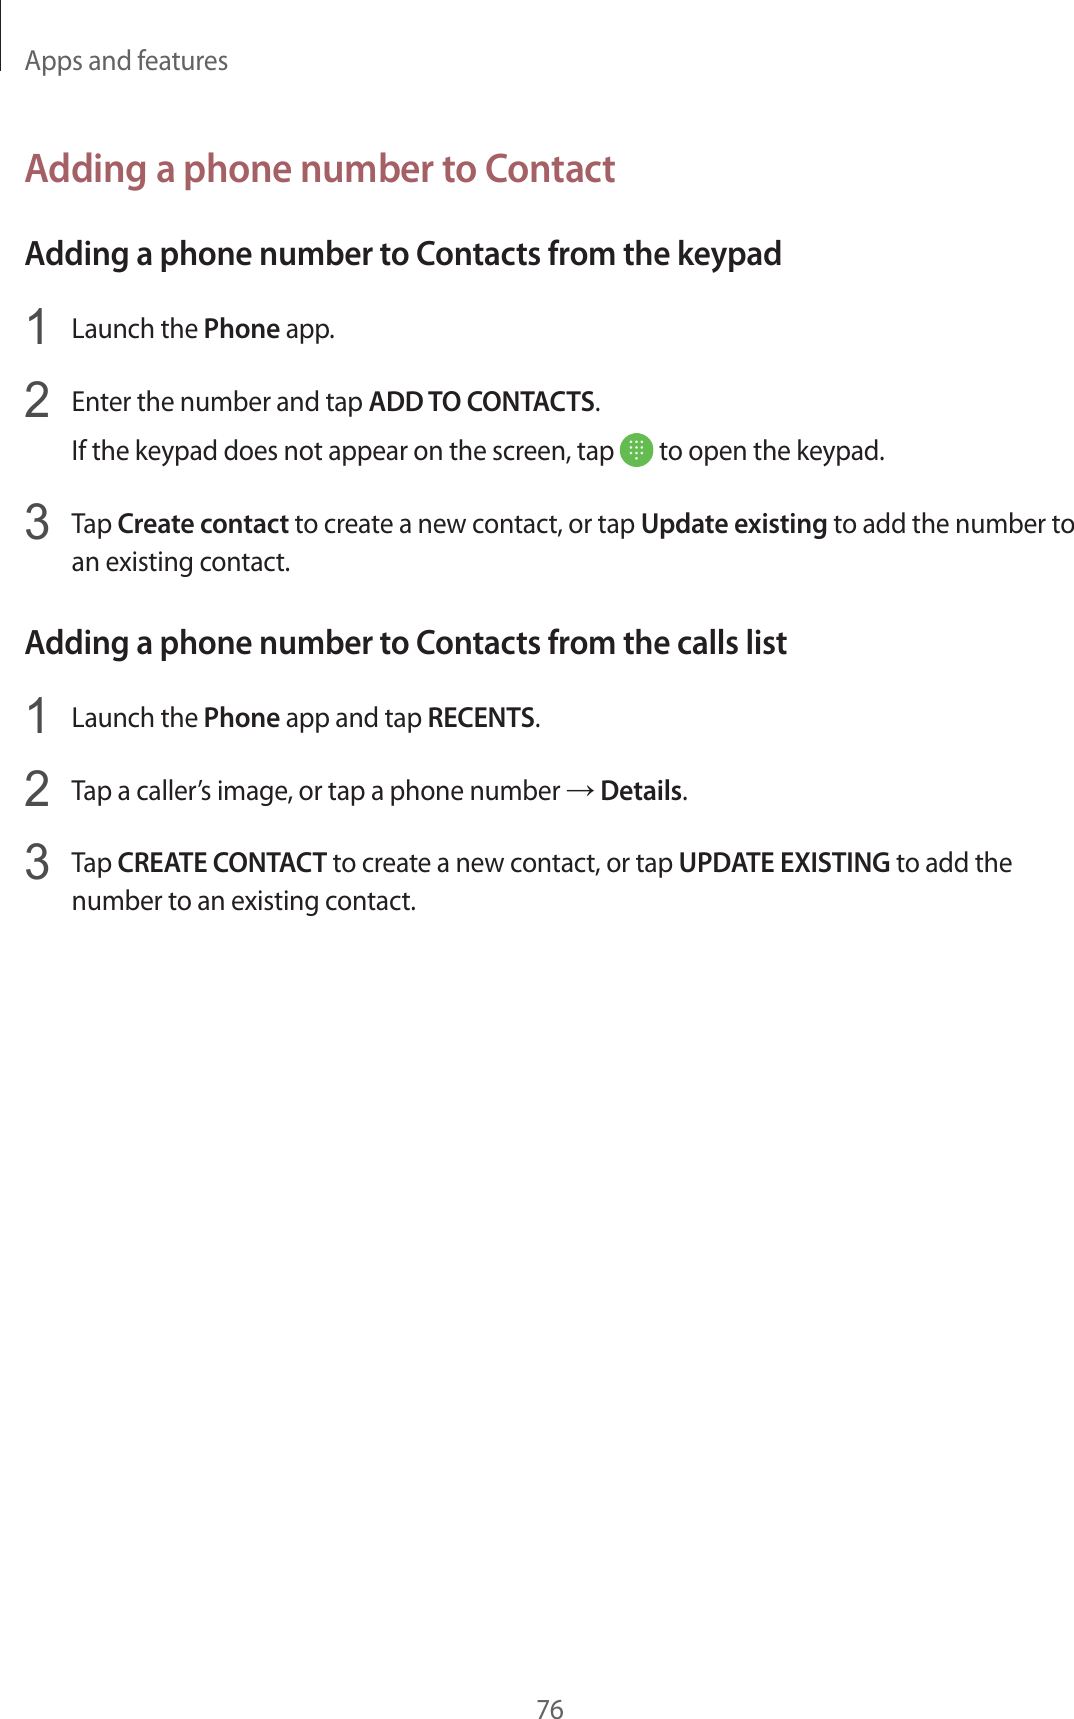 Apps and features76Adding a phone number to ContactAdding a phone number to Contacts from the keypad1  Launch the Phone app.2  Enter the number and tap ADD TO CONTACTS.If the keypad does not appear on the screen, tap   to open the keypad.3  Tap Create contact to create a new contact, or tap Update existing to add the number to an existing contact.Adding a phone number to Contacts from the calls list1  Launch the Phone app and tap RECENTS.2  Tap a caller’s image, or tap a phone number → Details.3  Tap CREATE CONTACT to create a new contact, or tap UPDATE EXISTING to add the number to an existing contact.